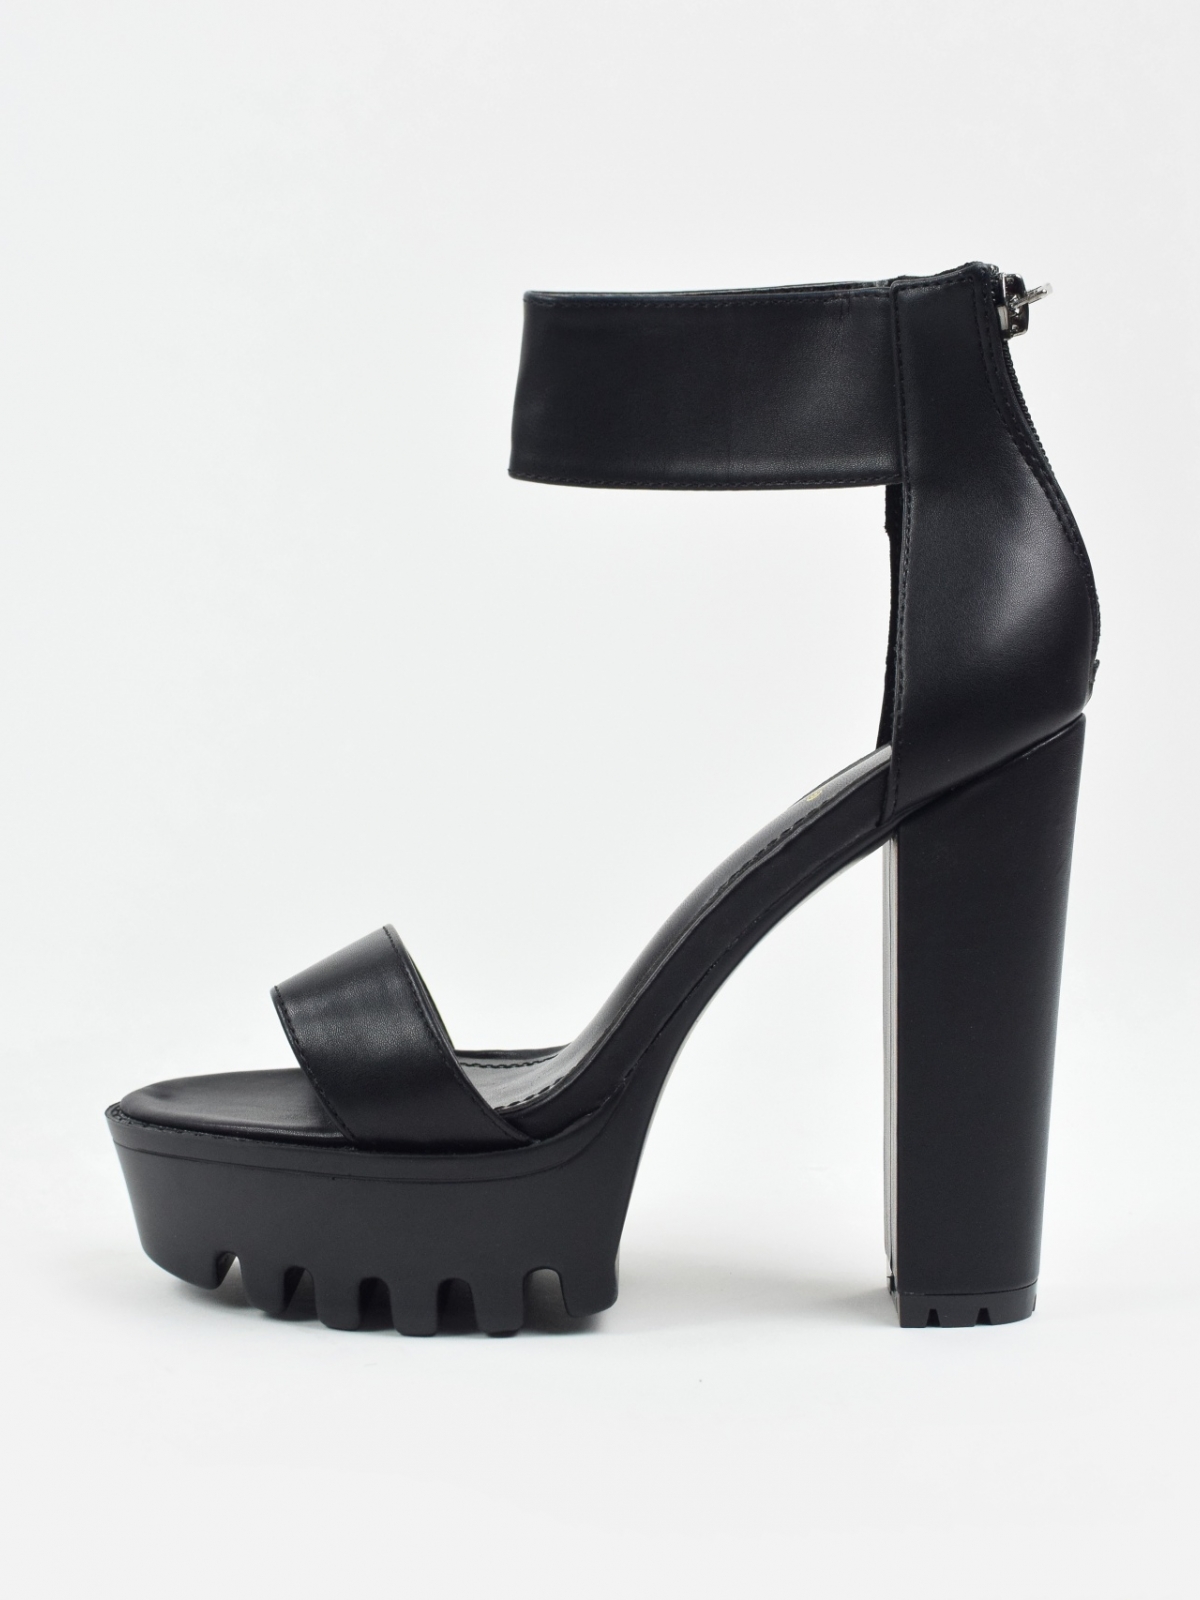 Exclusive design high heeled sandals with stable thick heel in black